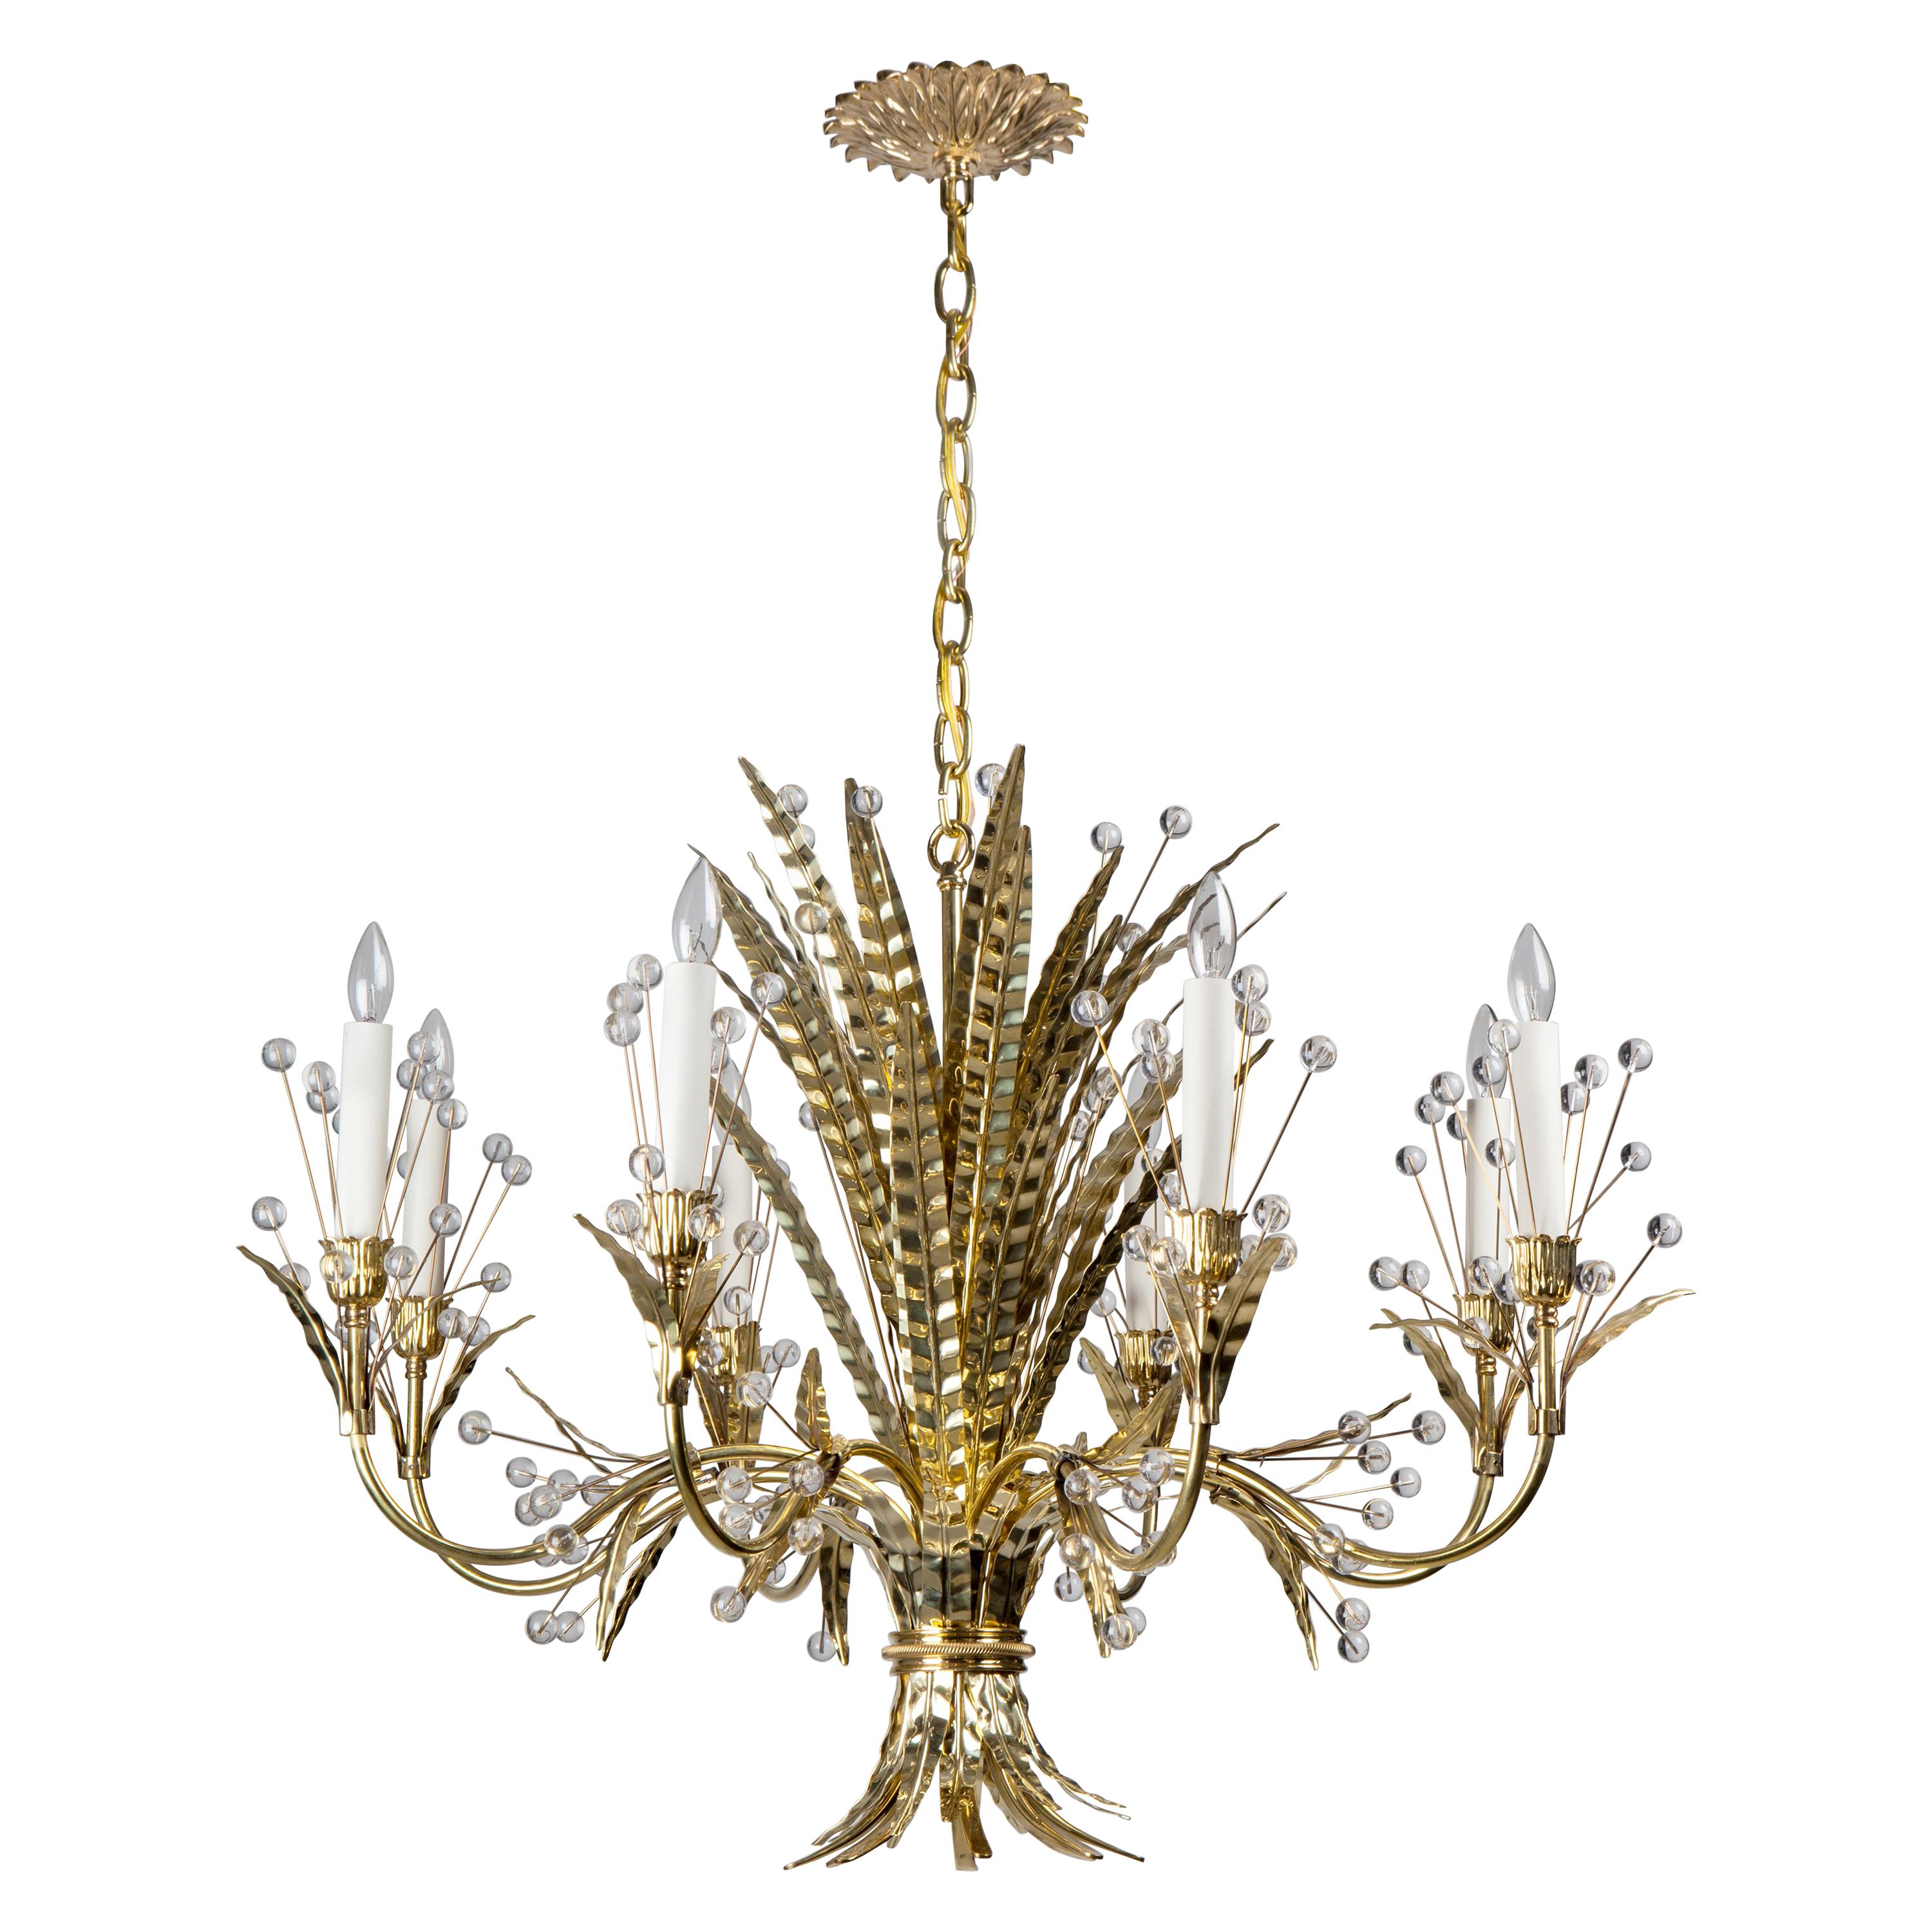 Polished Brass Plume 8 Chandelier Designed by Tony Duquette for Remains Lighting